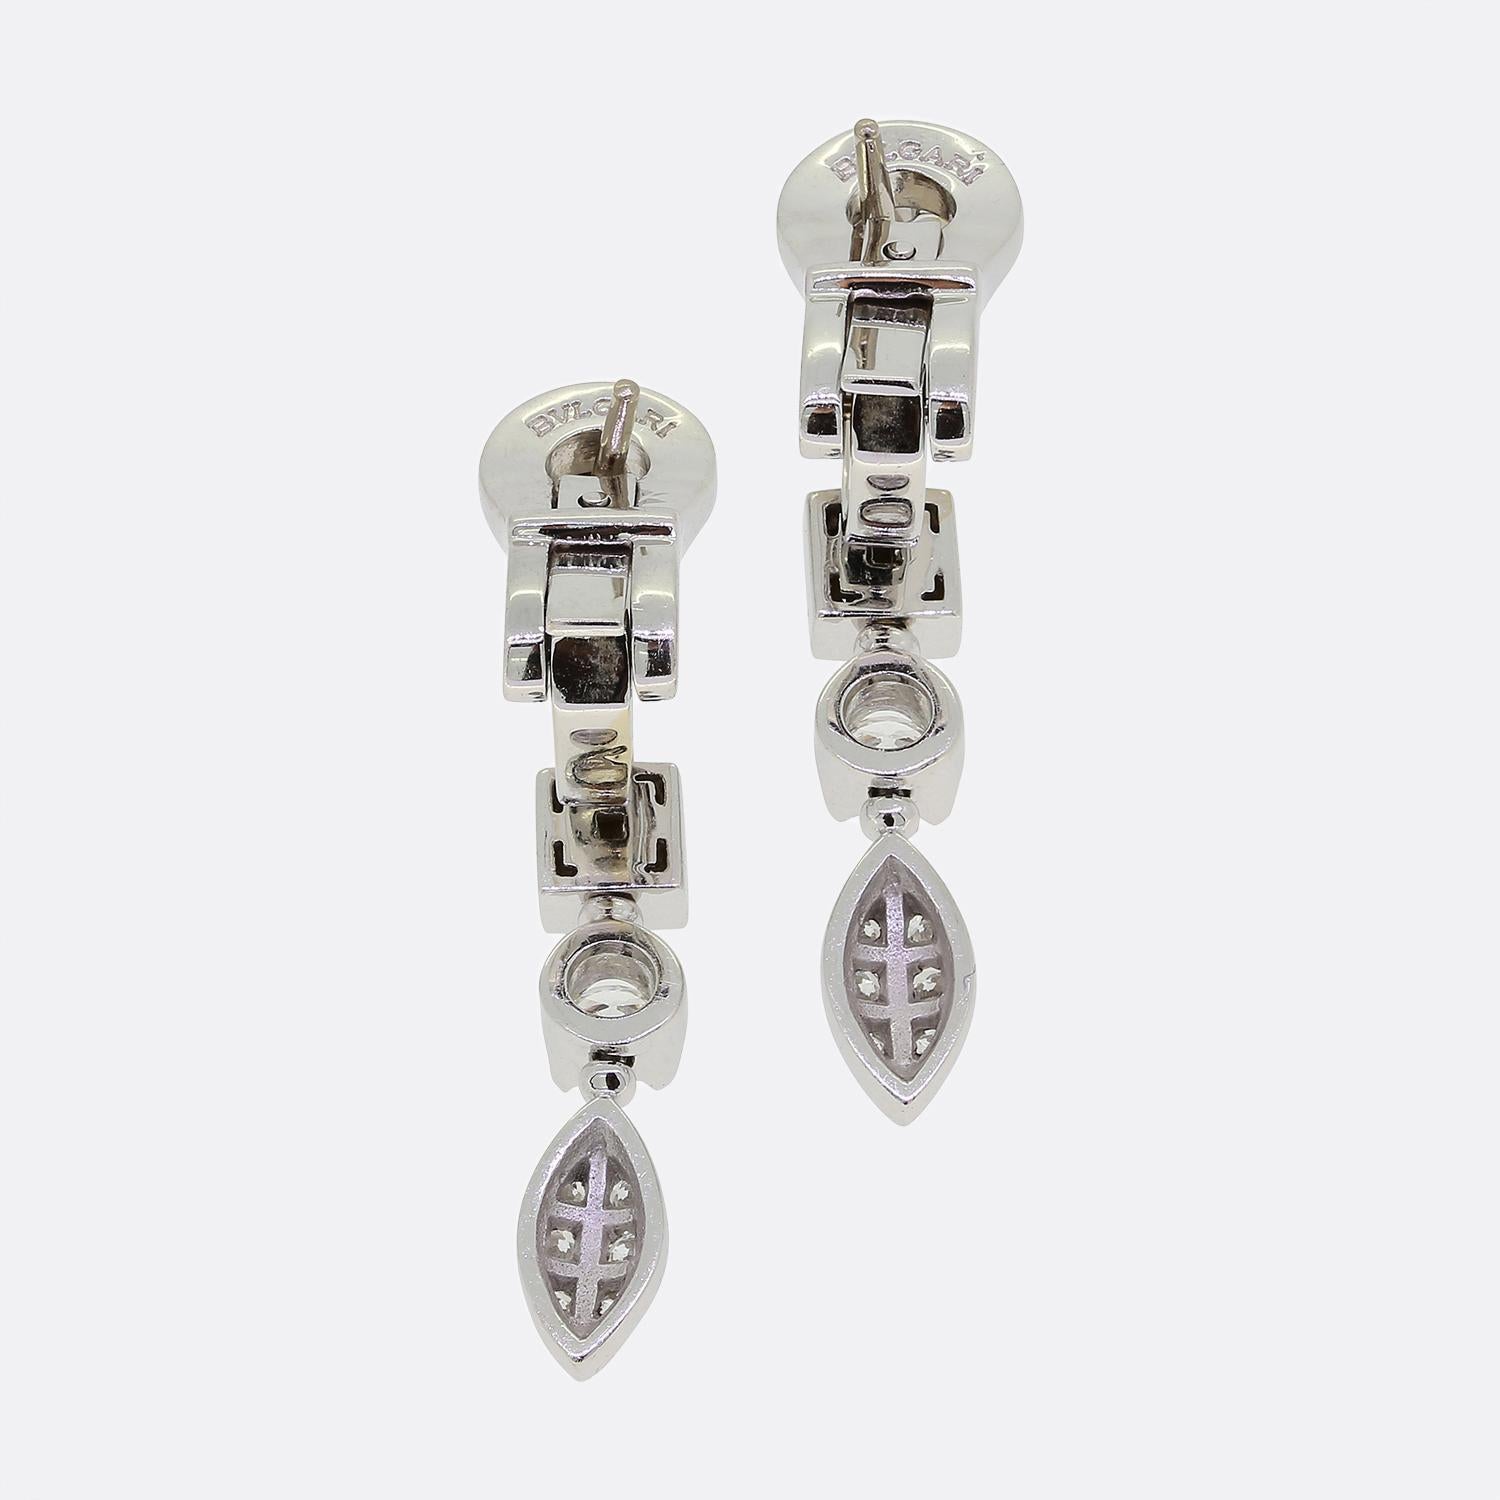 Here we have an elegant pair of drop earrings from the world renowned luxury Italian jewellery house of Bvlgari. Beautifully crafted from 18ct white gold, these dangling earrings form part of the Lucea collection and showcase an alternating array of